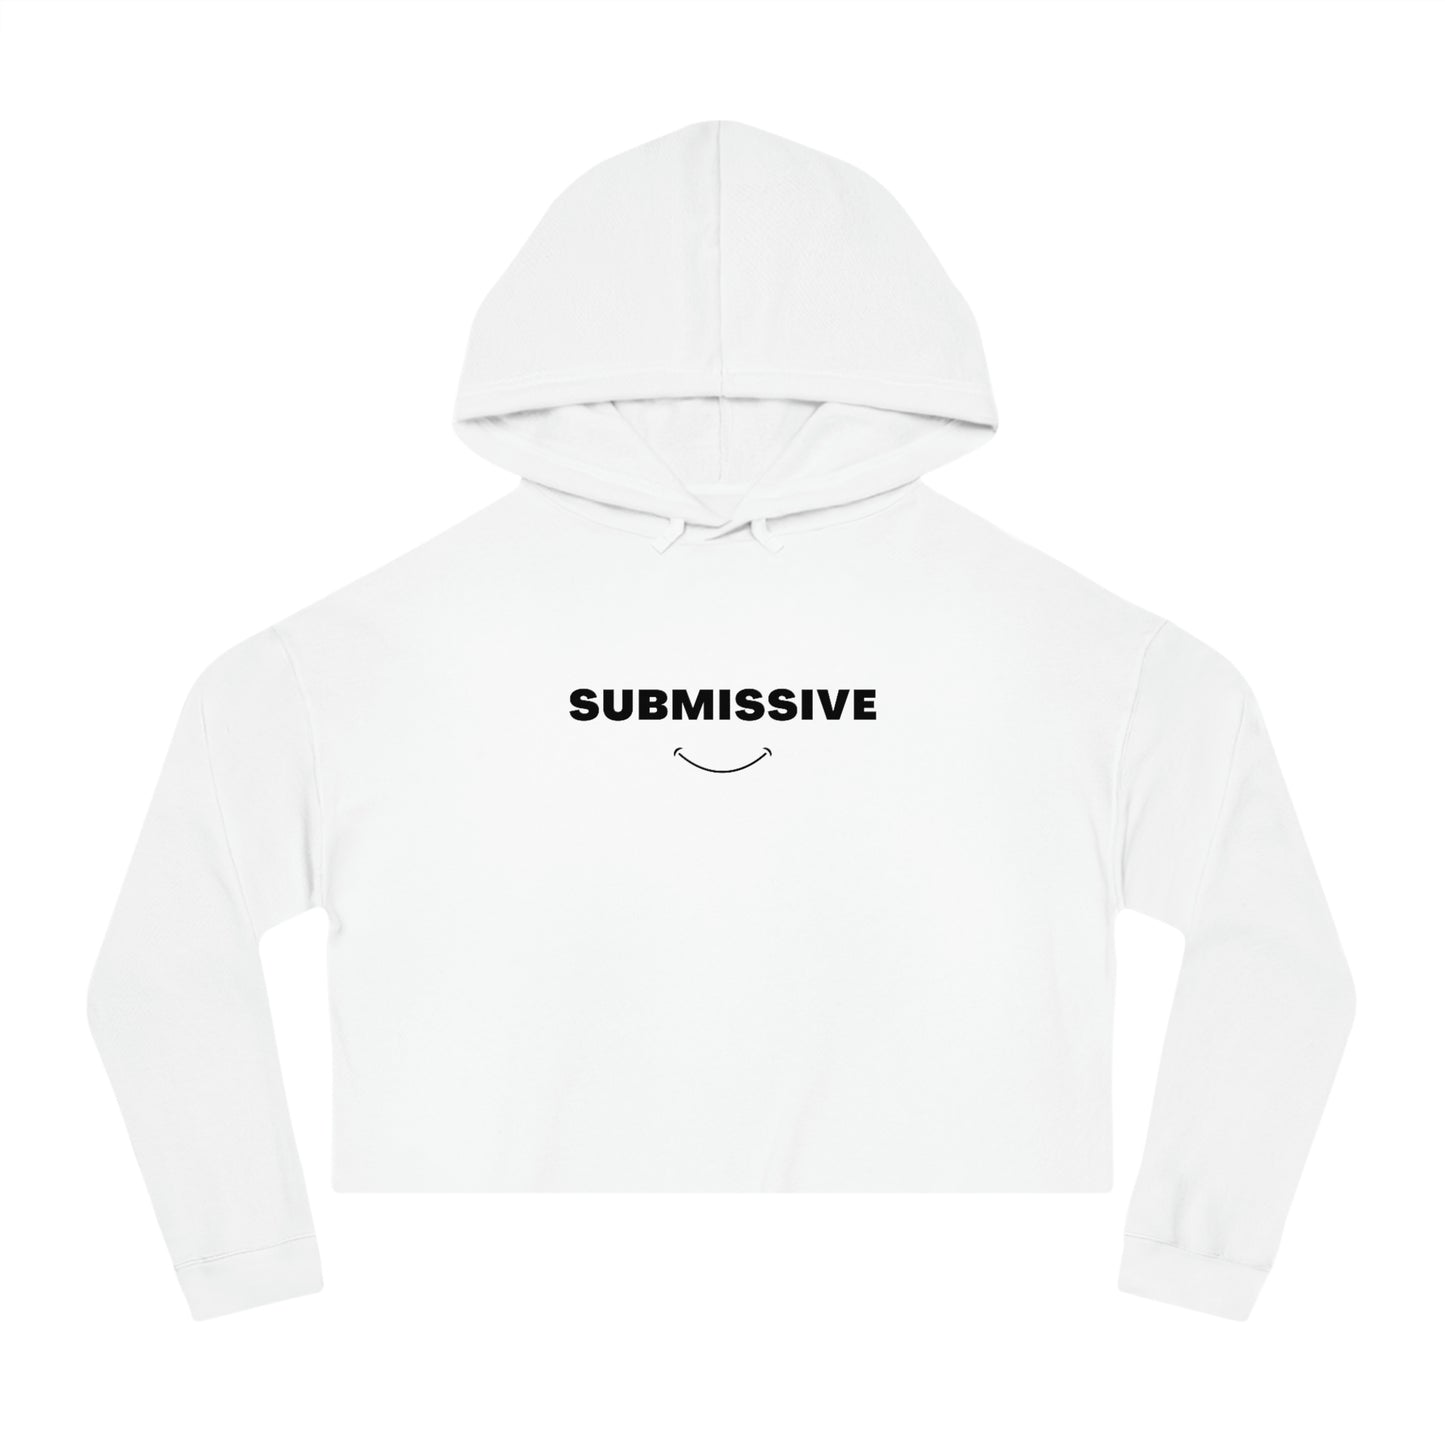 The submissive Smile | Cropped Hoodie